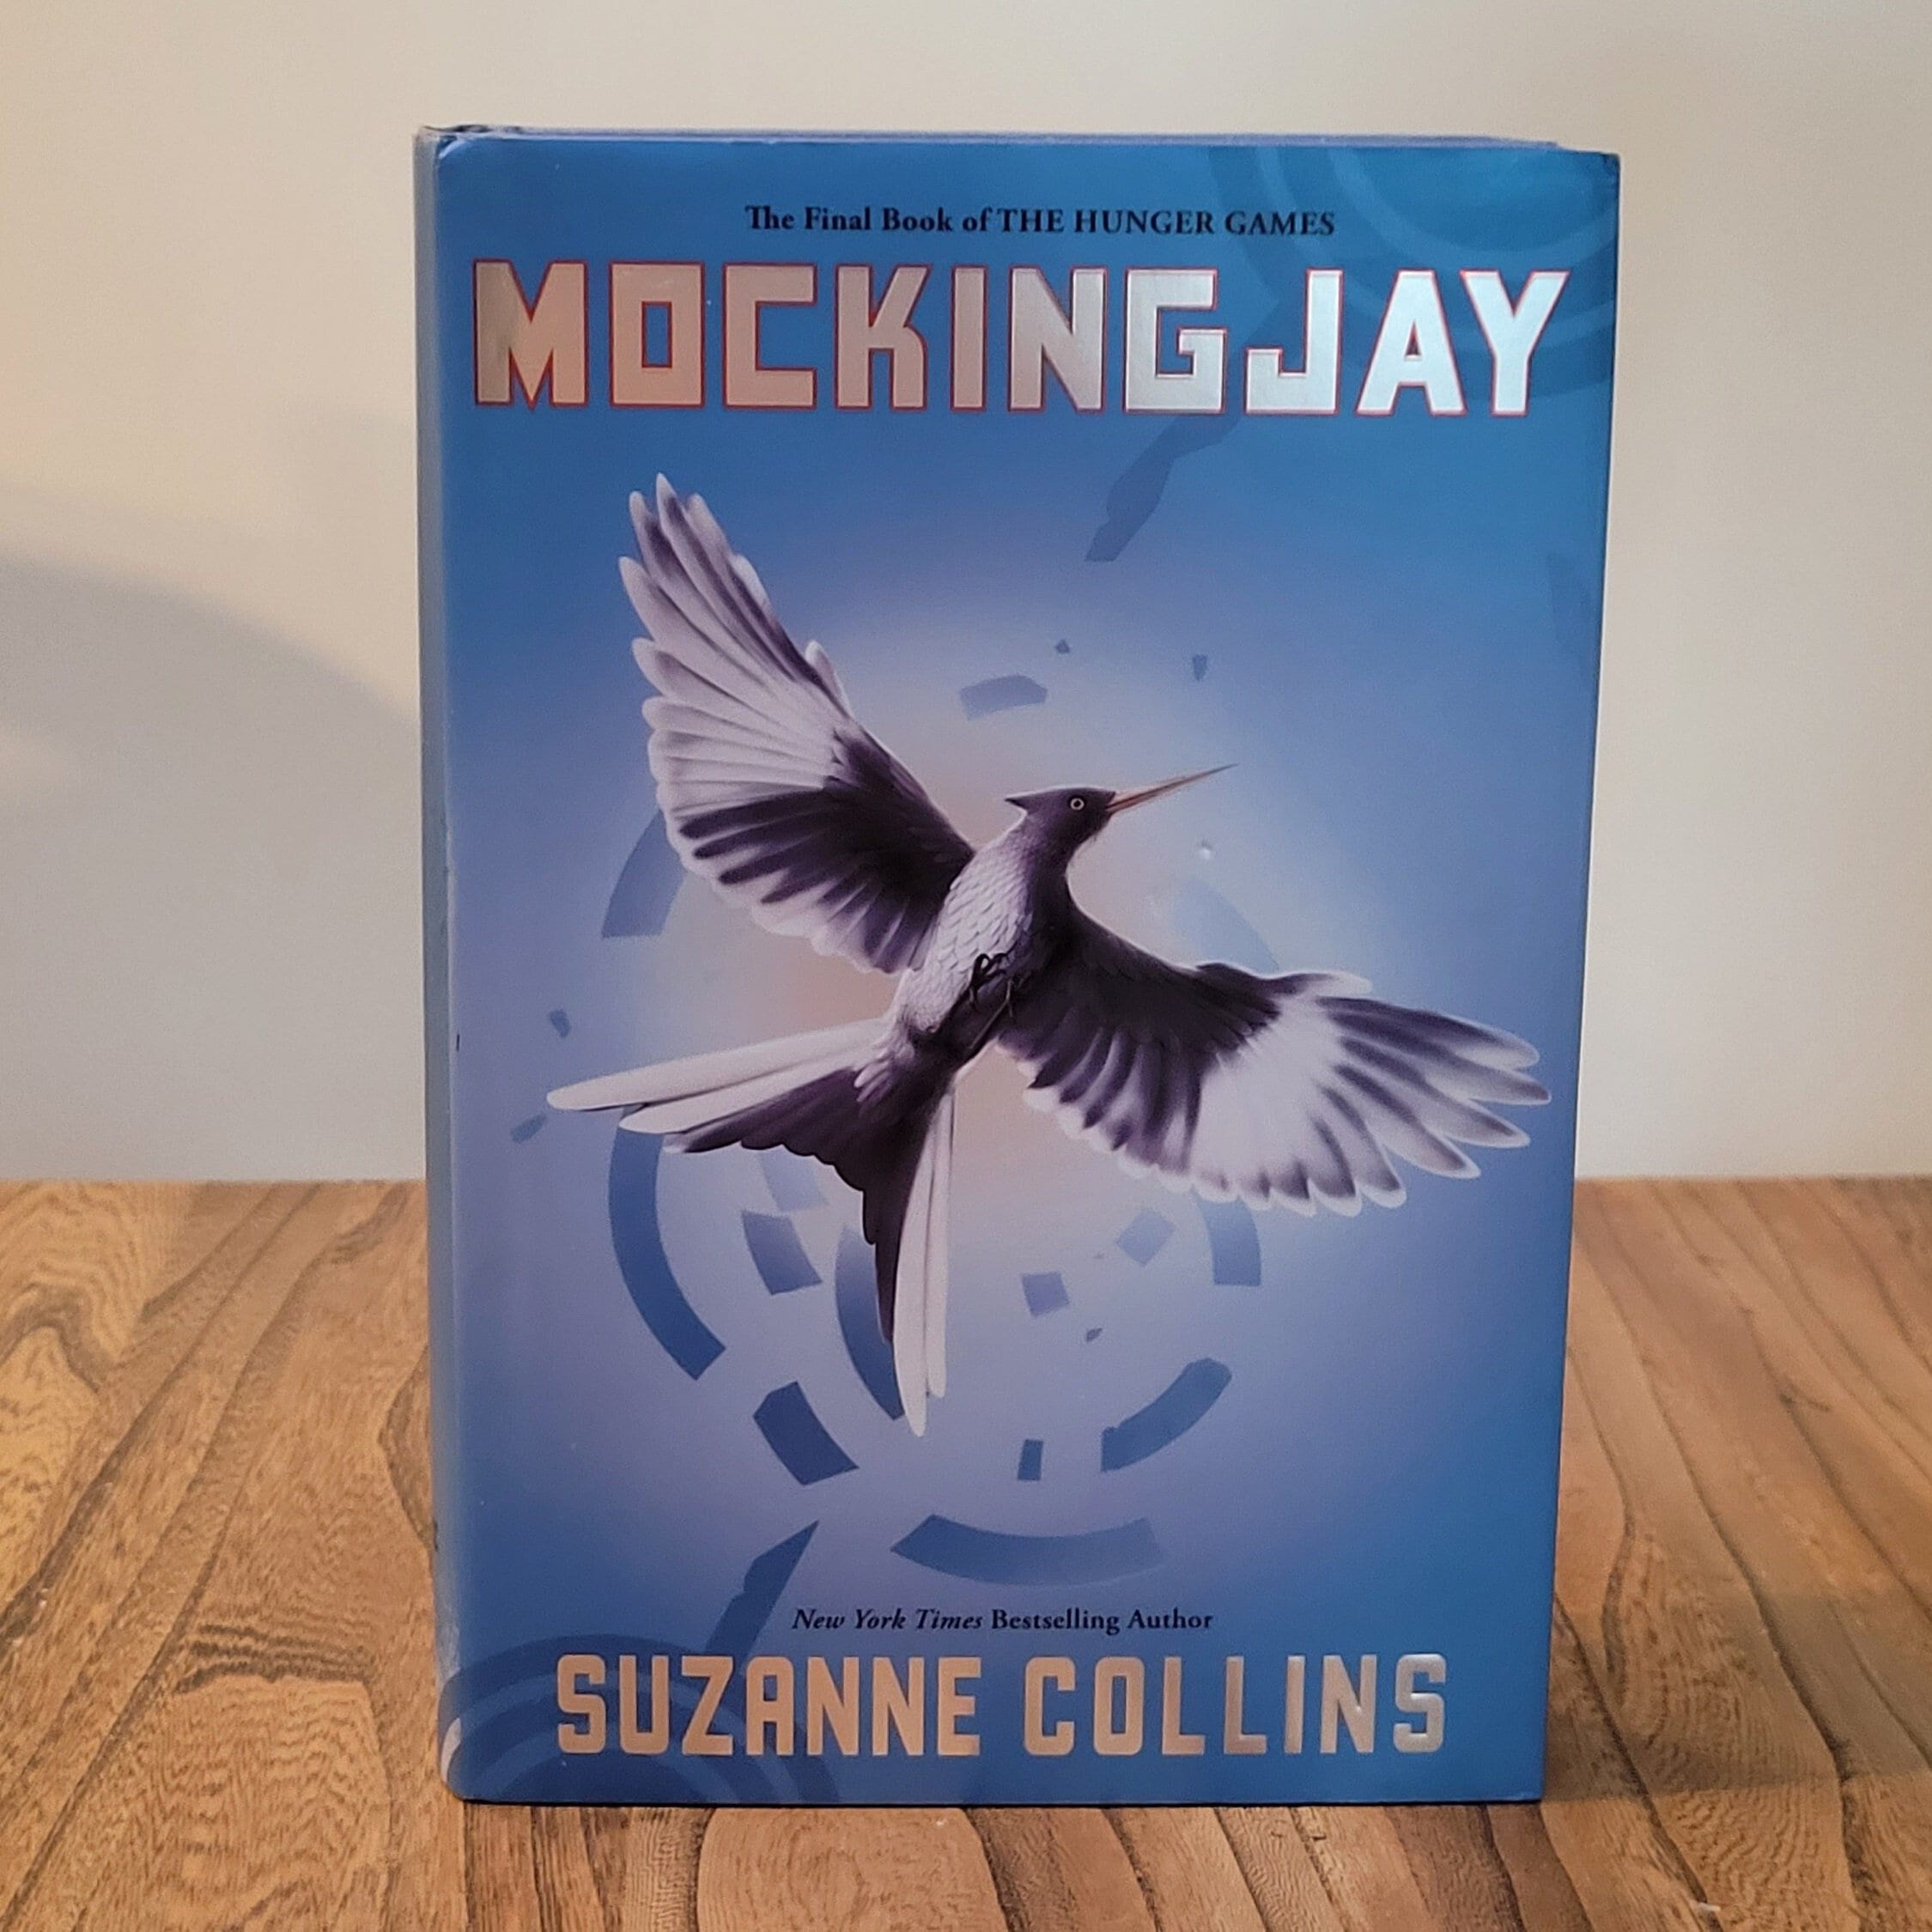 BIBLIO, Mockingjay (The Final Book of The Hunger Games) by Suzanne Collins, Paperback, 2010, Scholastic Press, 1st Edition